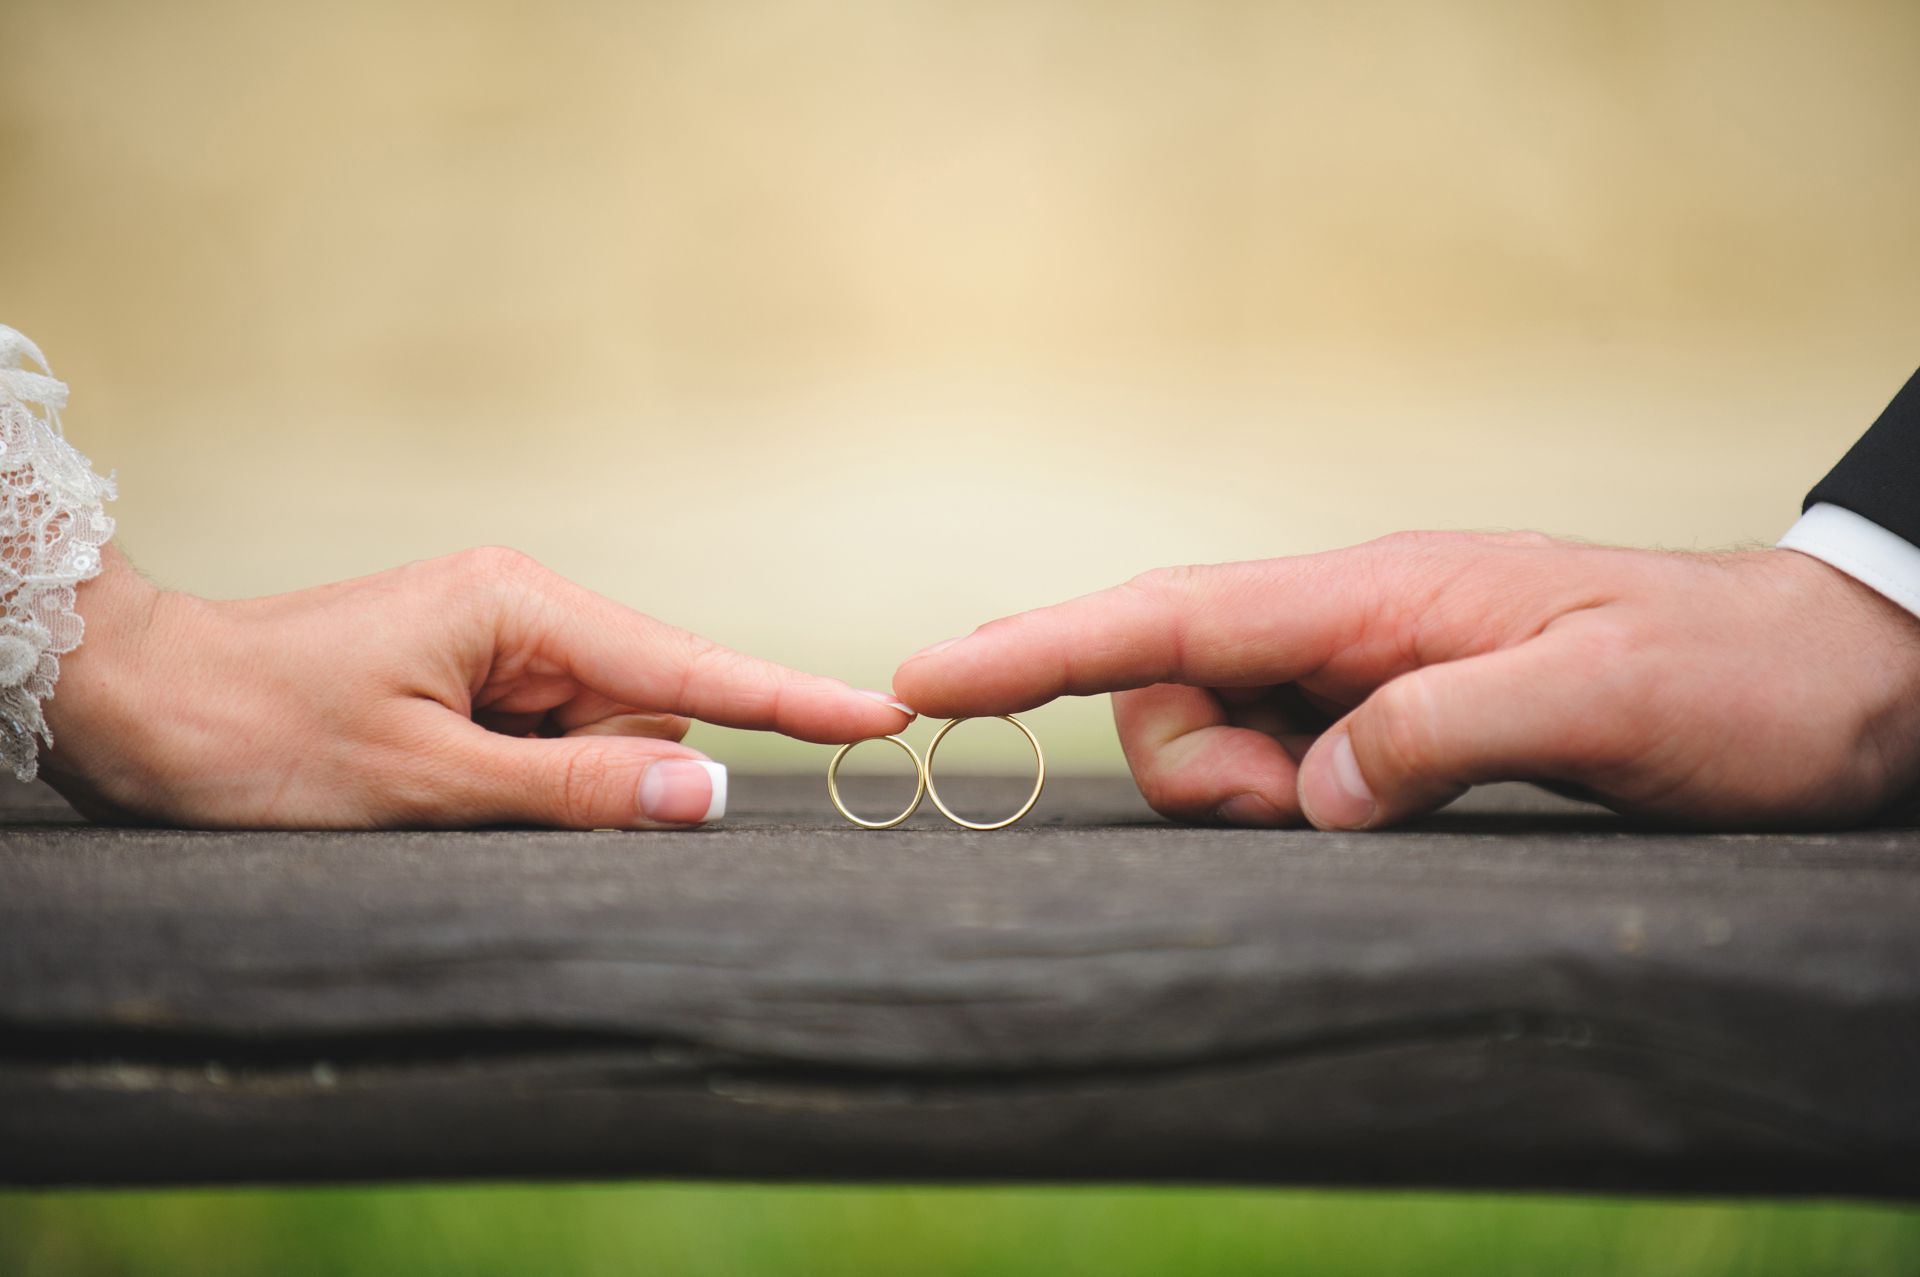 An Image of a bride's hand and groom's hand touching each other